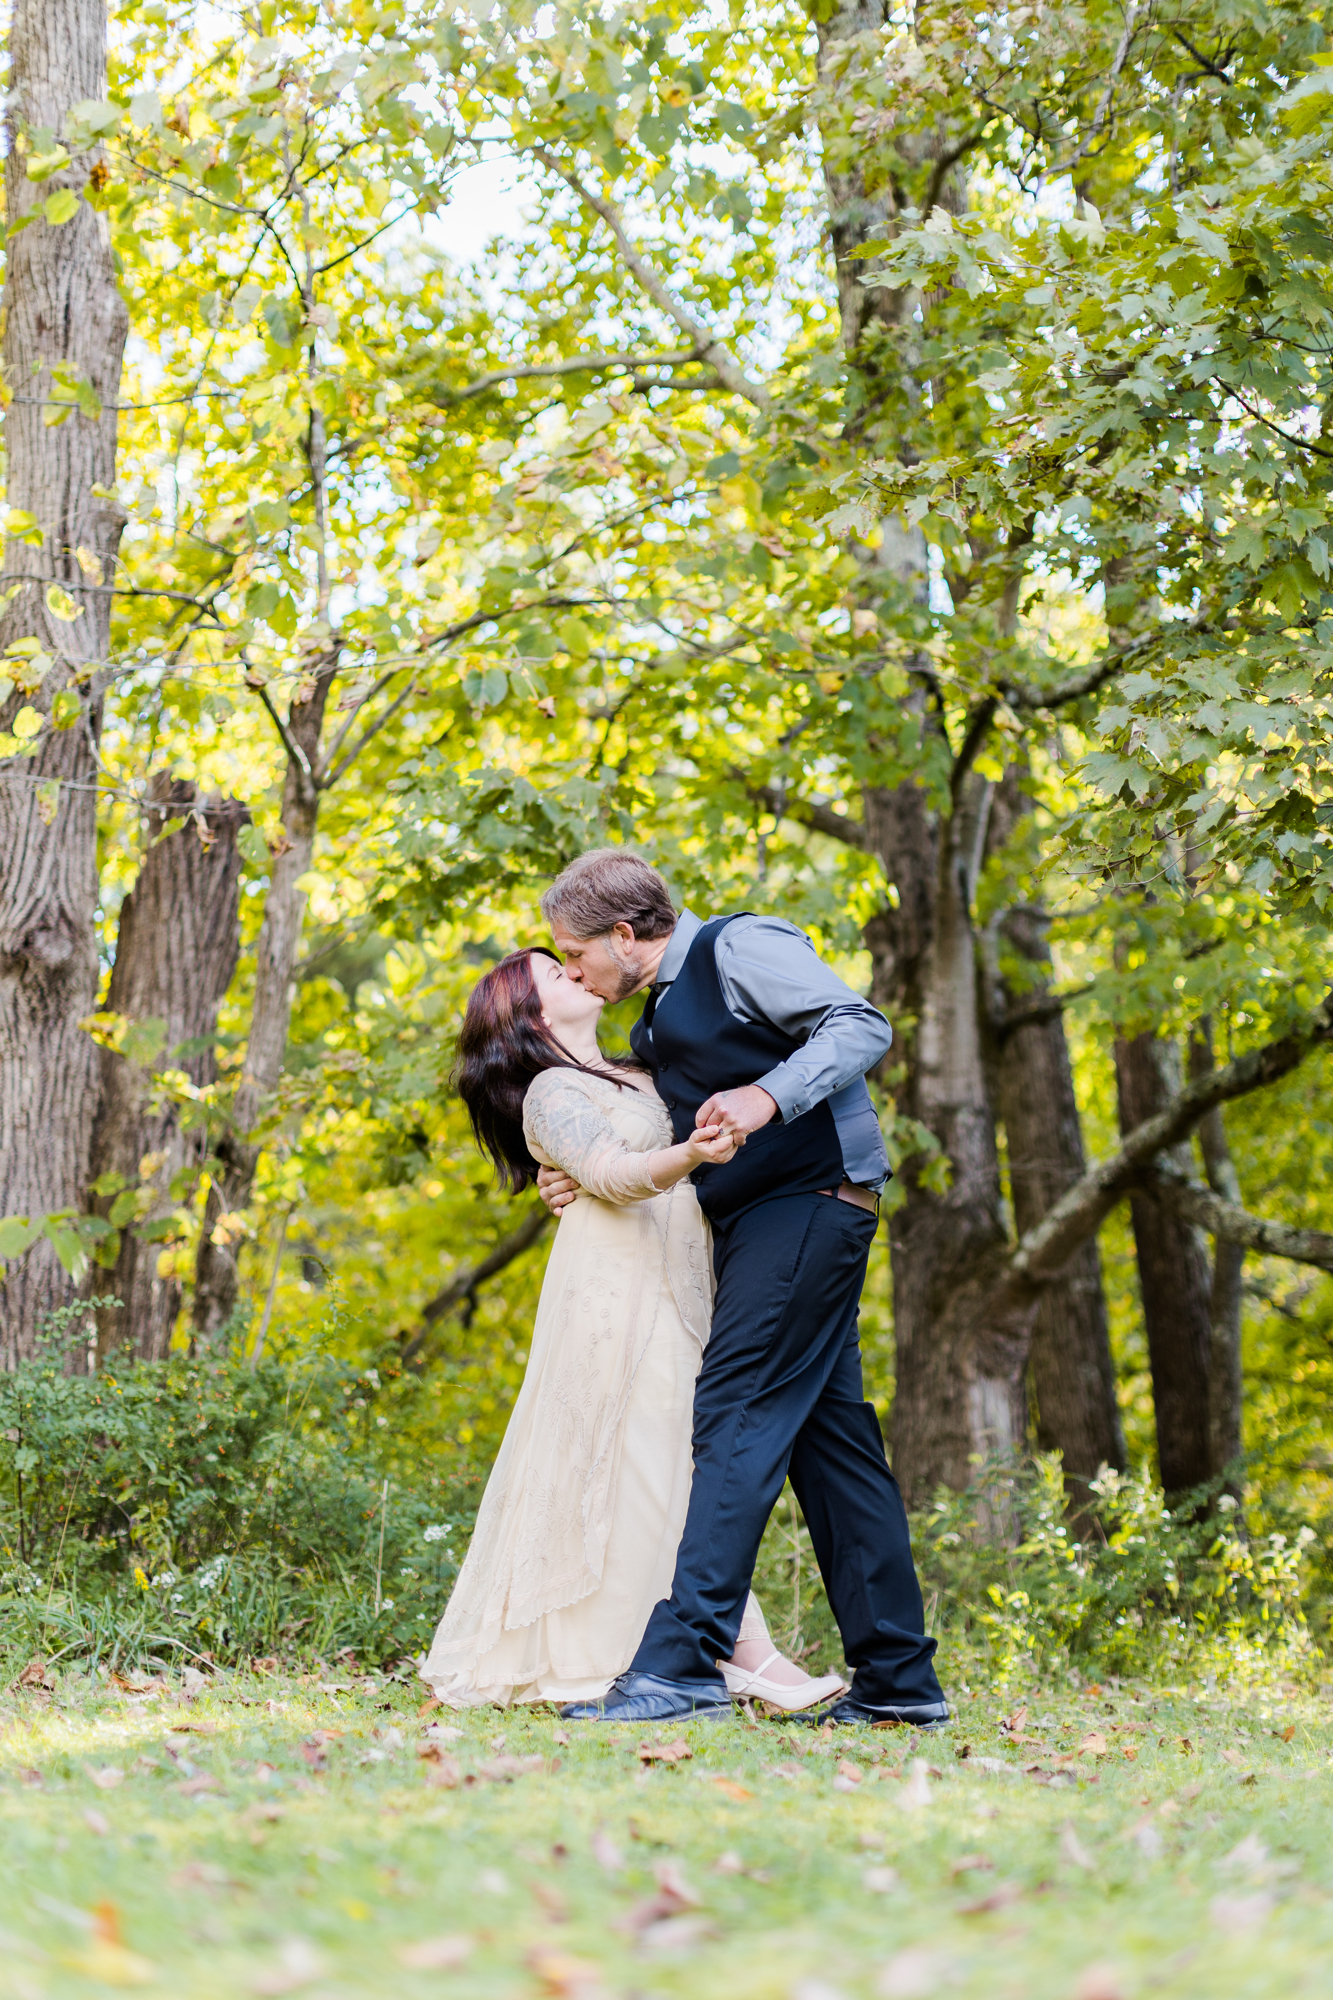 Breathtaking Upstate New York Elopement Photos at Saugerties in Fall